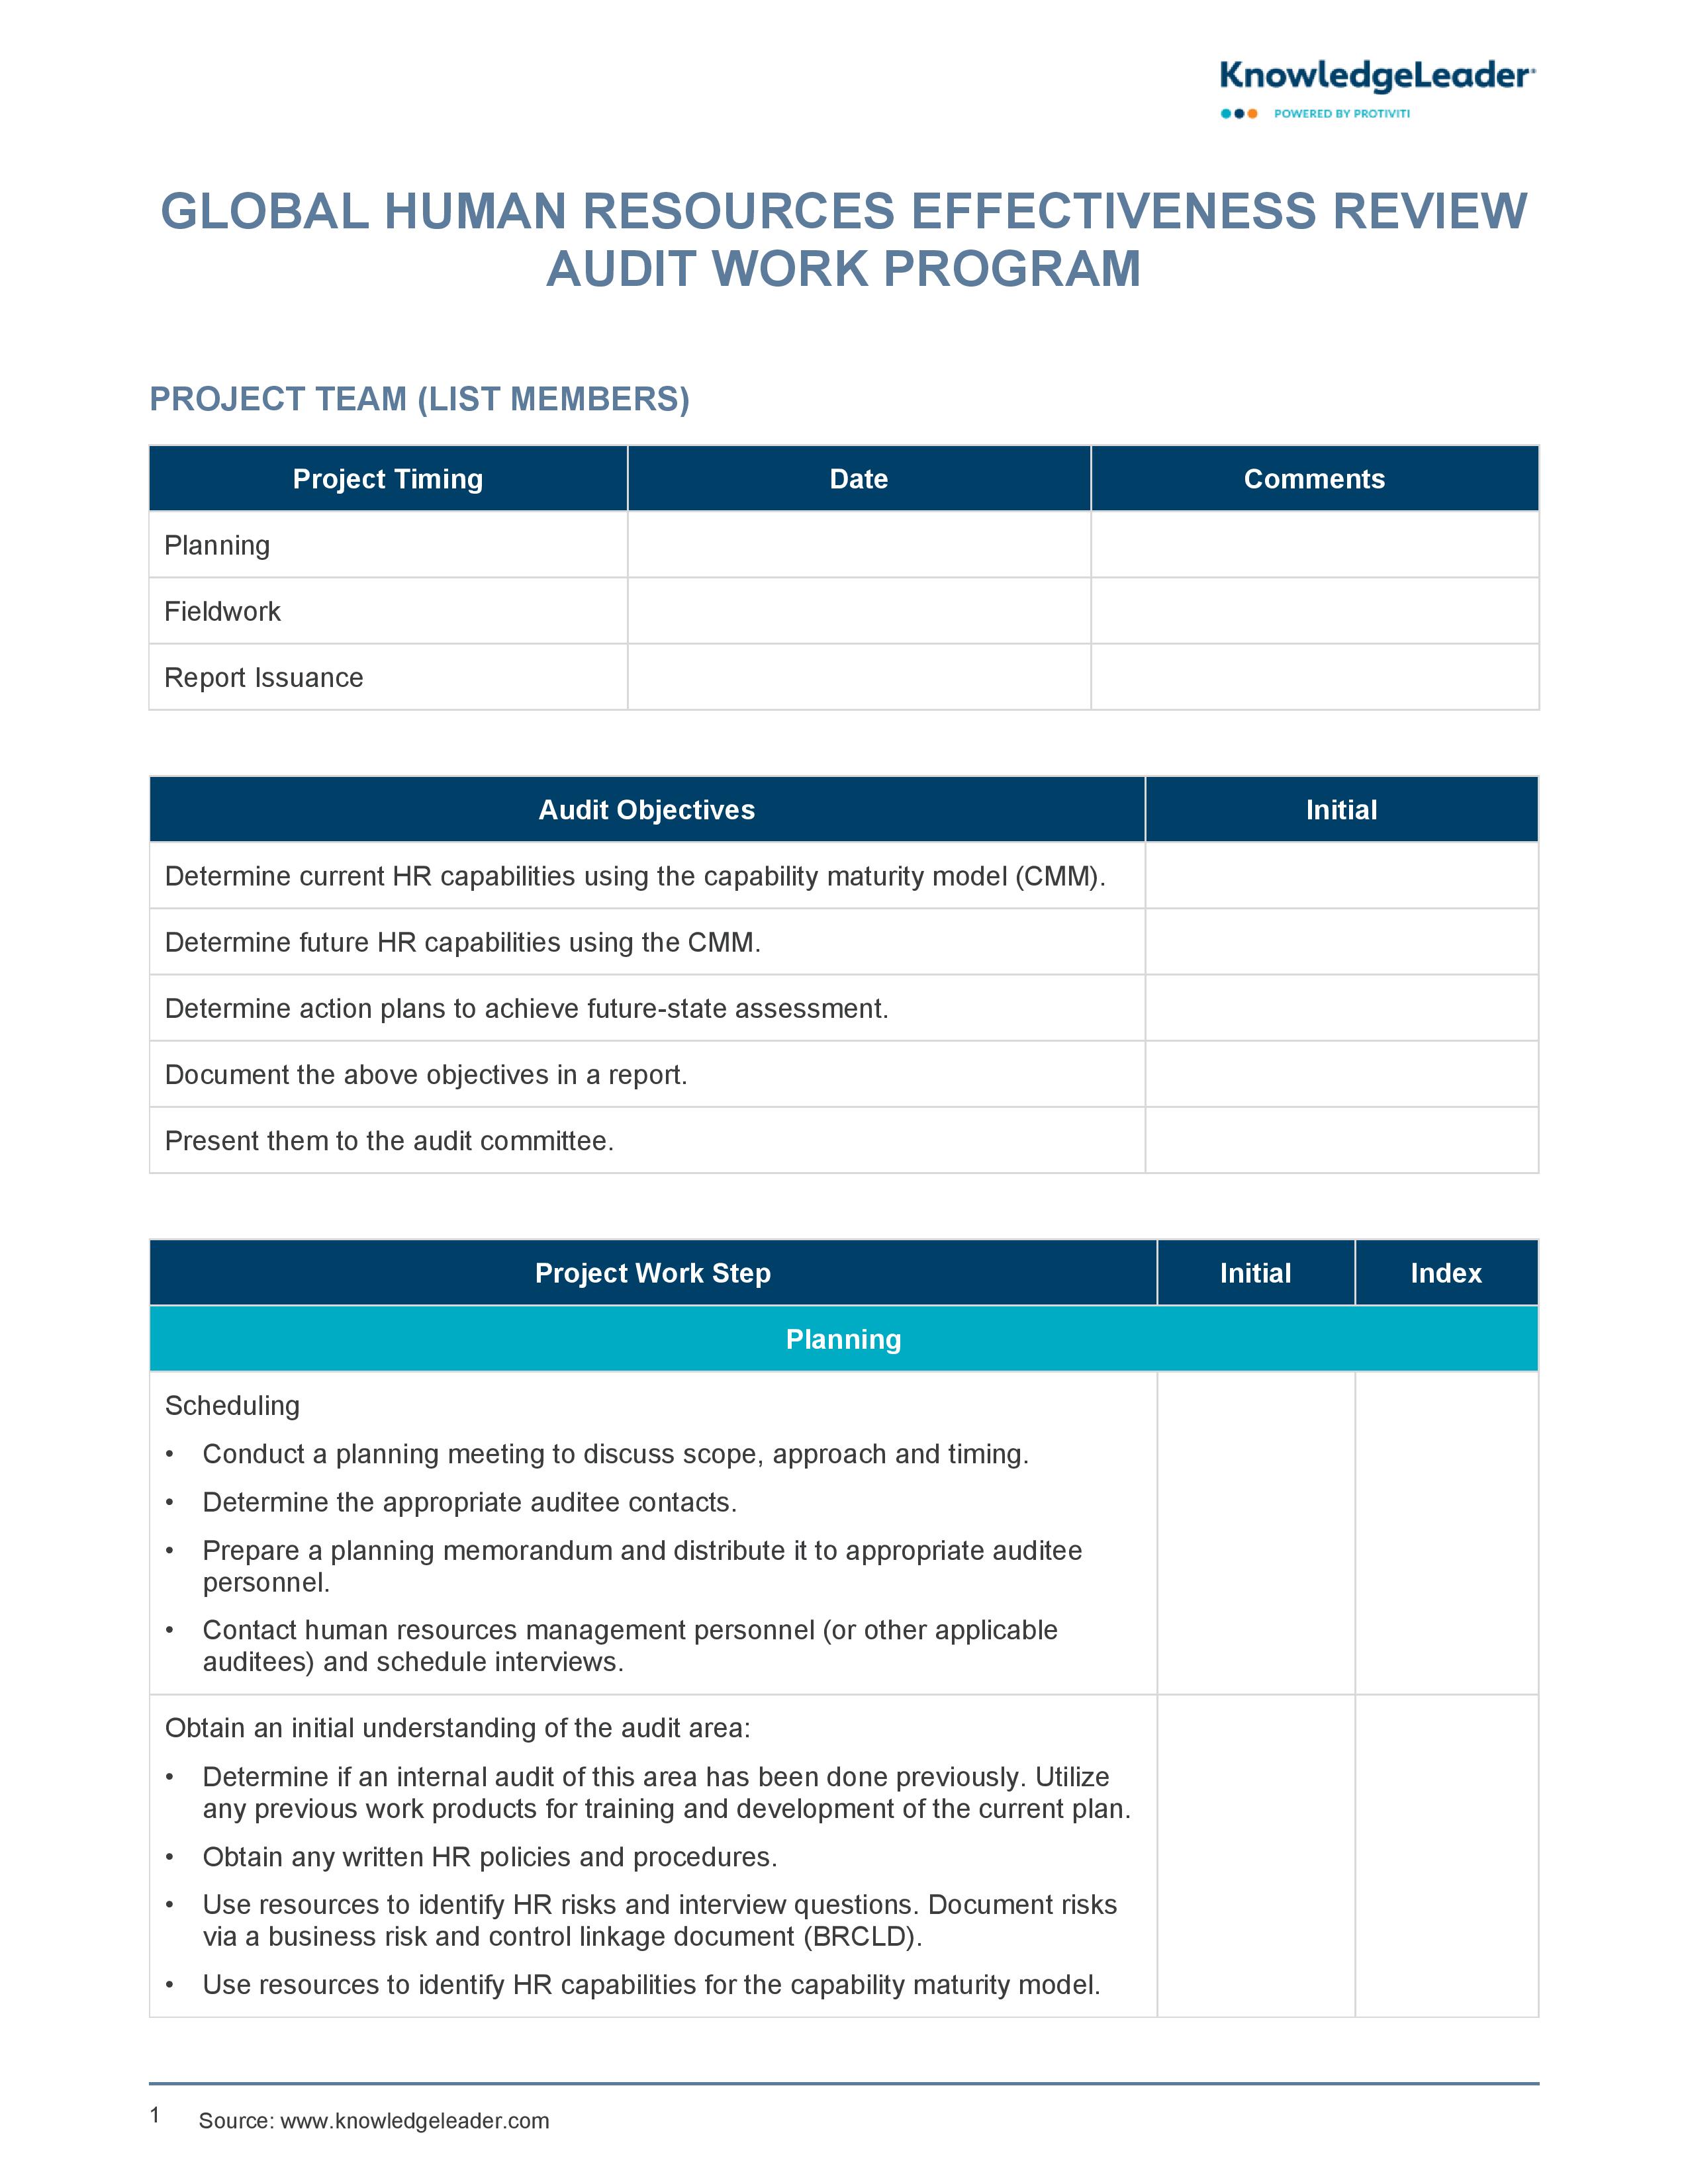 Screenshot of the first page of Global Human Resources Effectiveness Review Audit Work Program